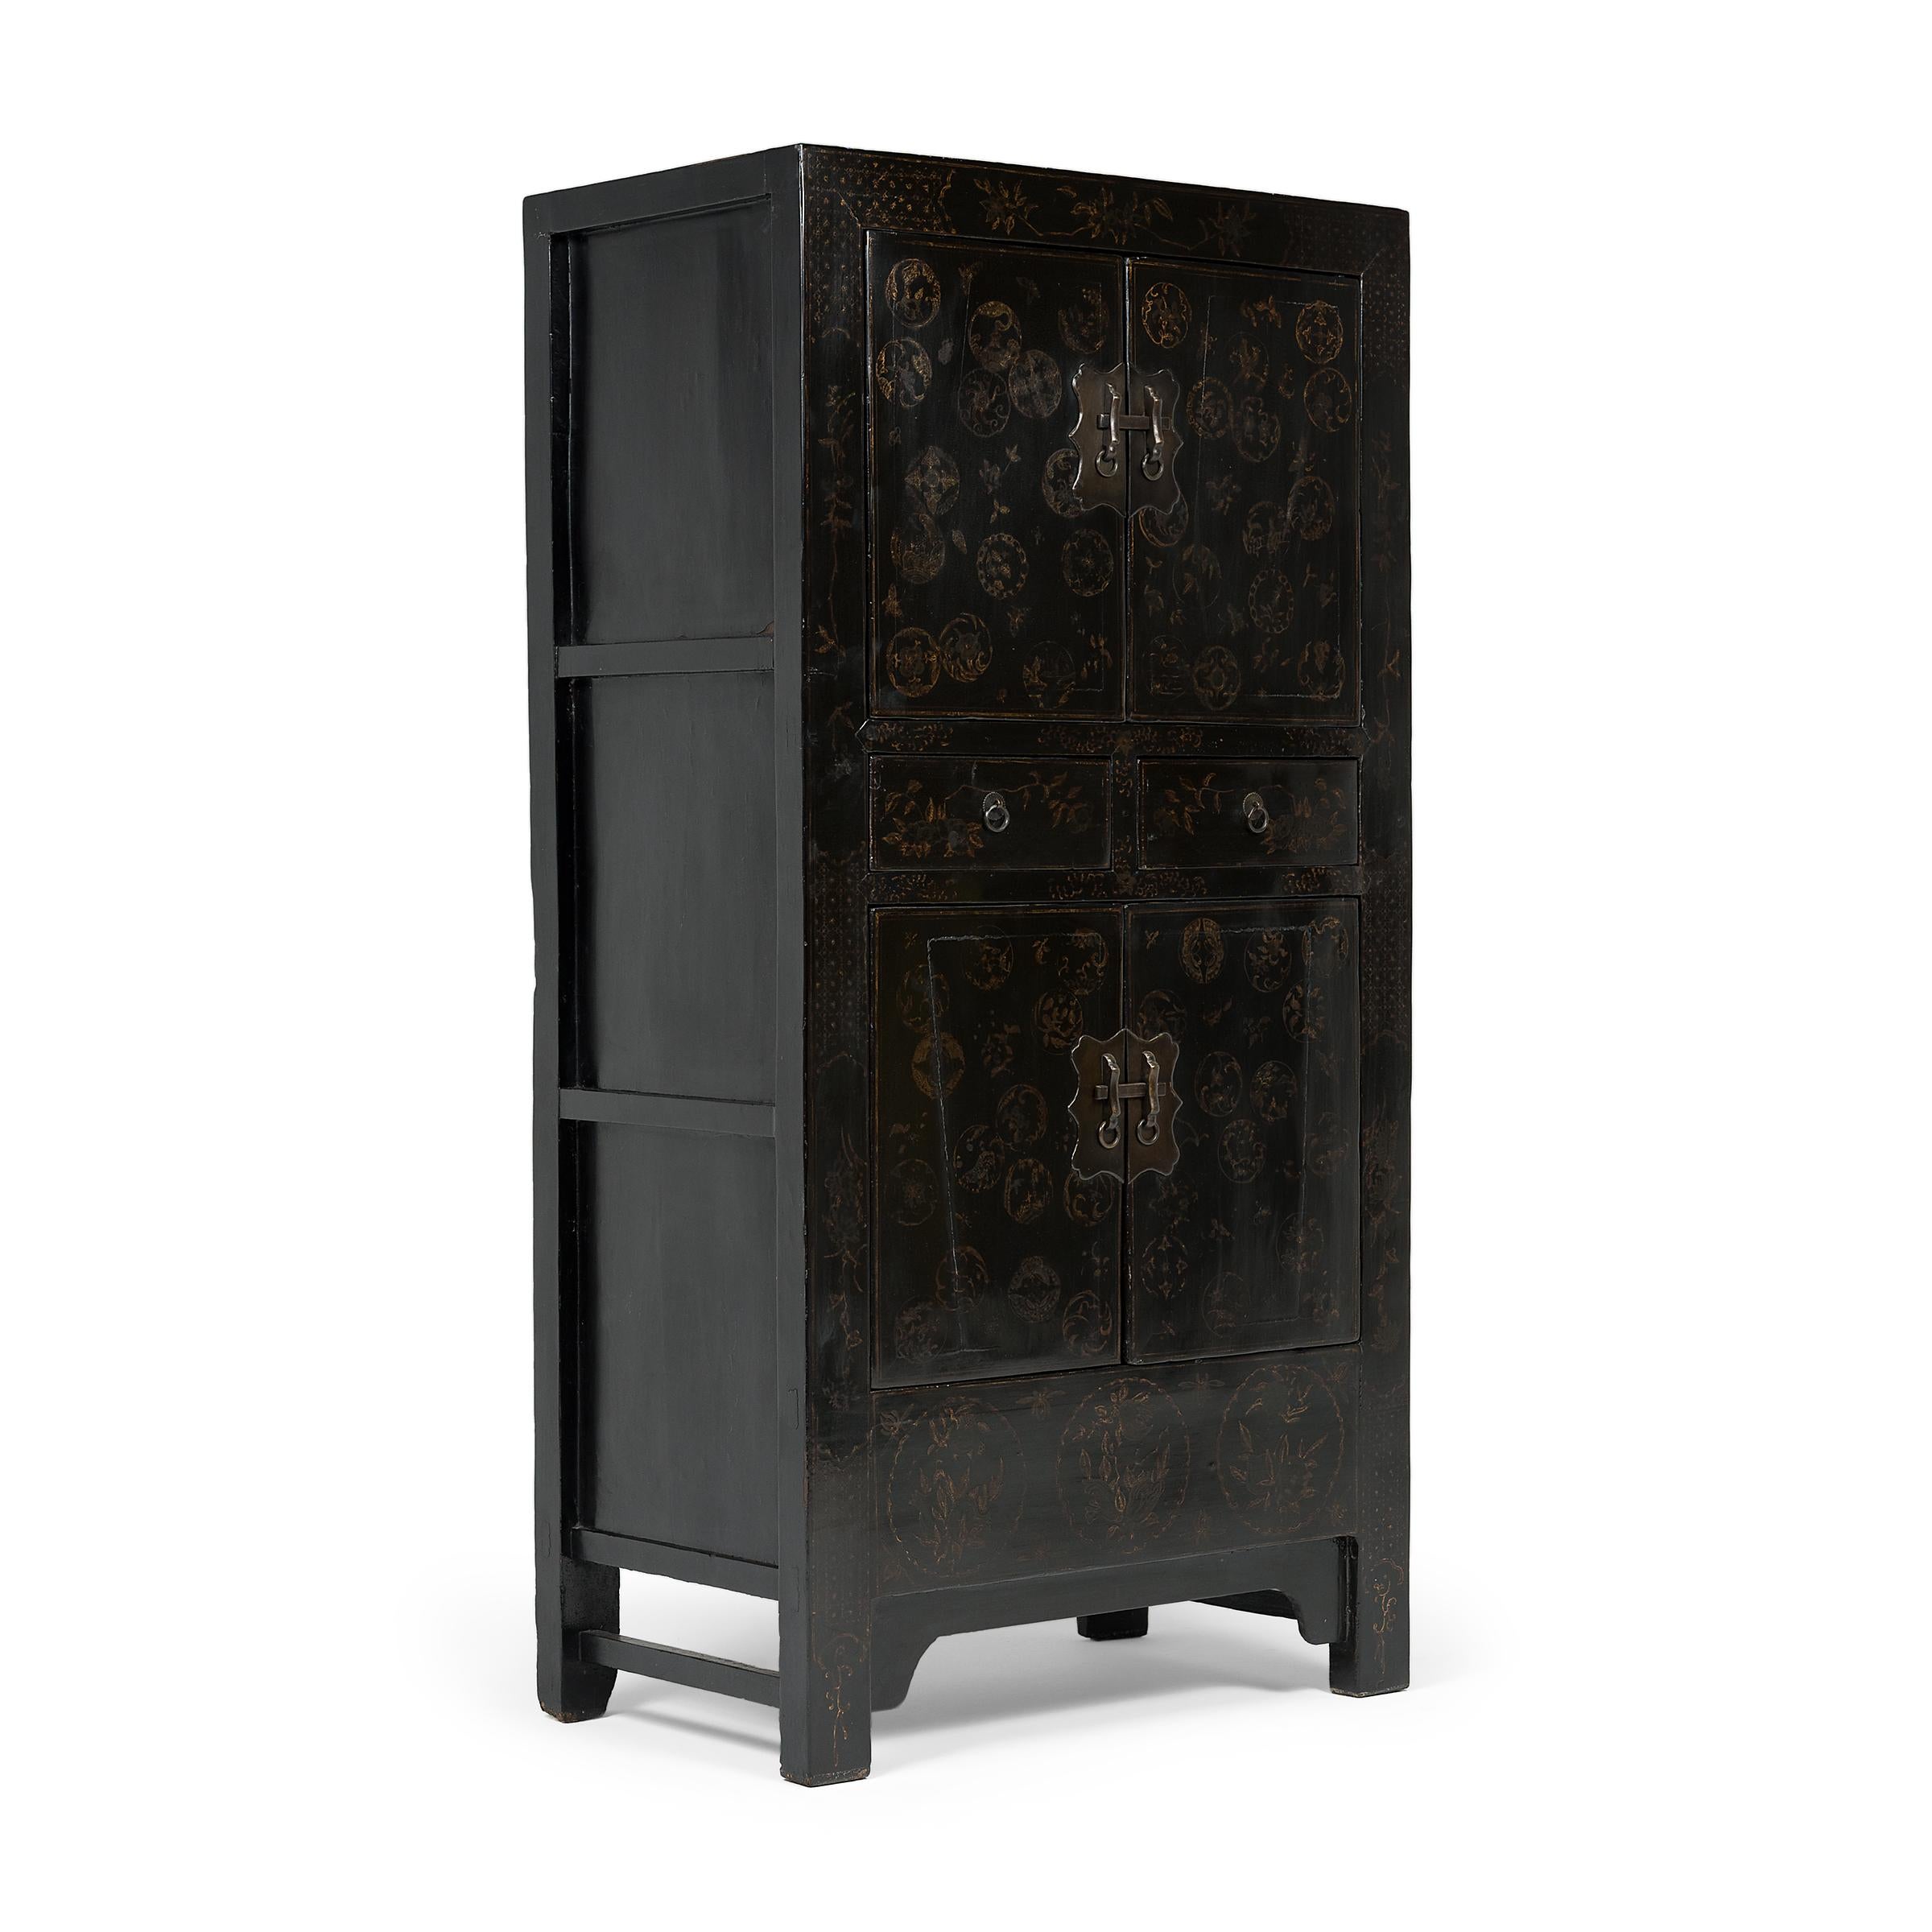 Crafted in the early 20th century, this tall cabinet has a clean-lined form designed with straight sides and square corners. The cabinet is cloaked in a glossy black lacquer finish, contrasted by hand-painted gilt decoration, now considerably faded